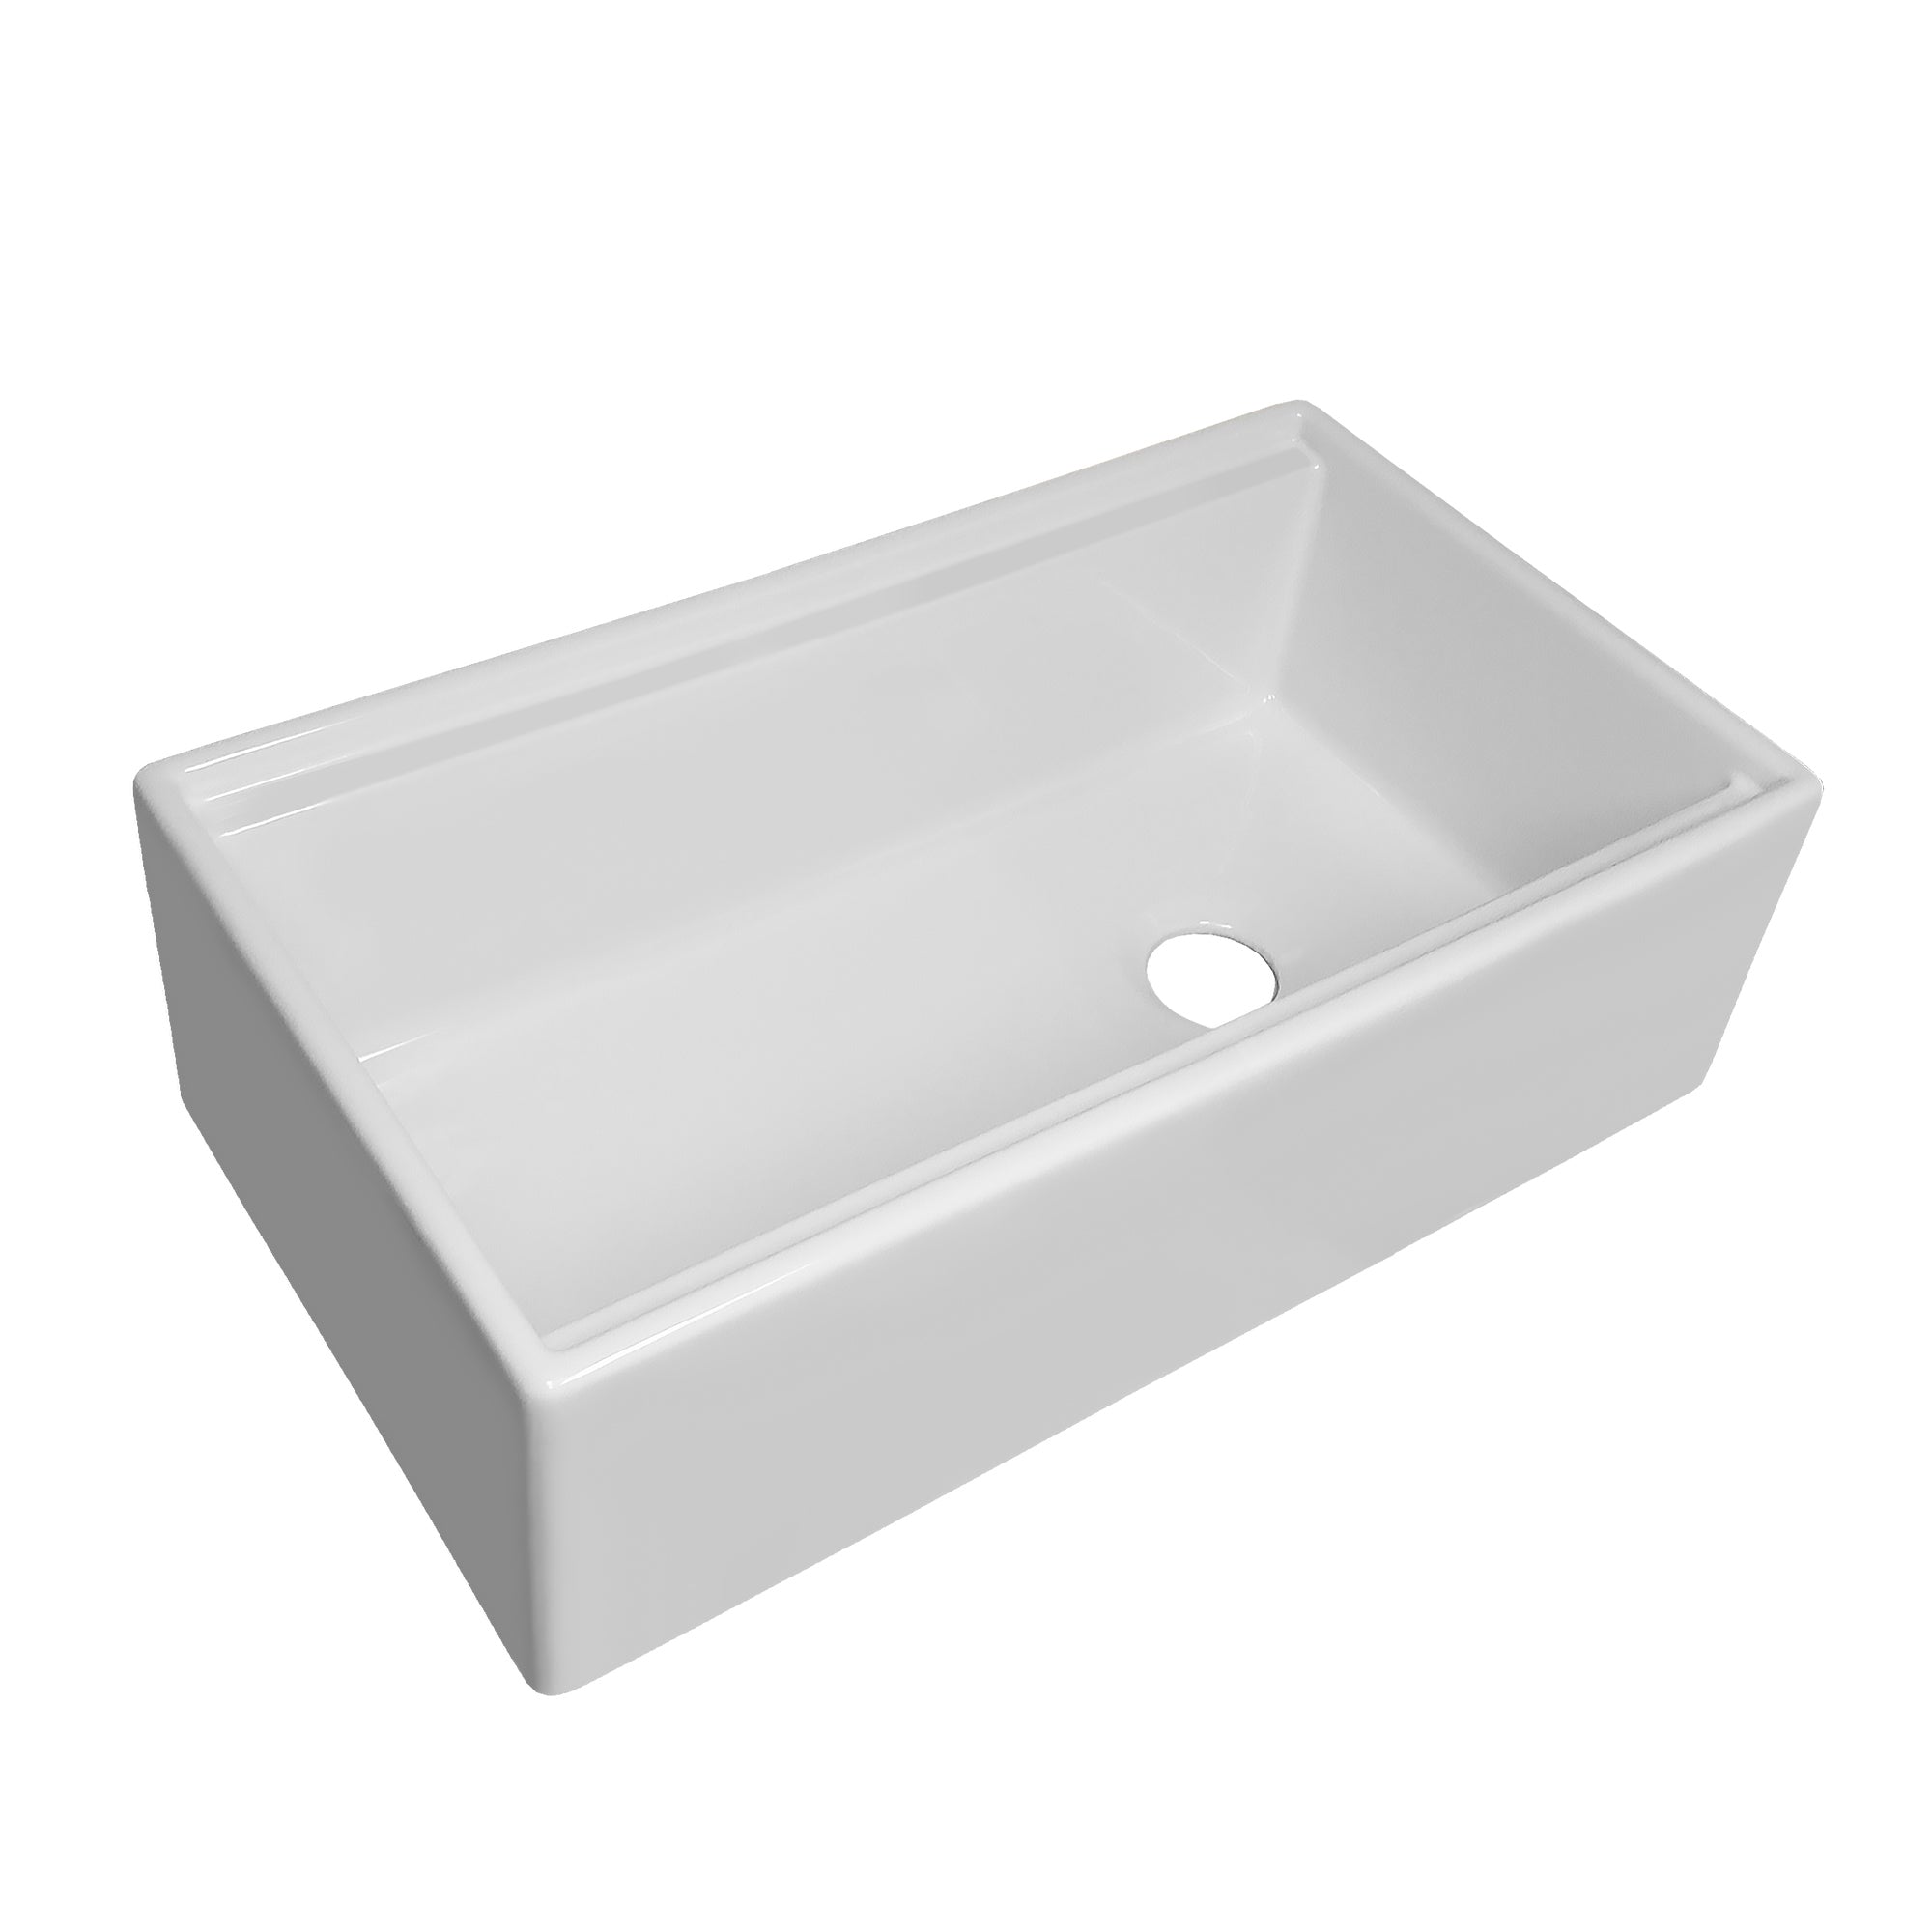 Whitehaus Collection 33 Reversible Single Bowl Fireclay Sink Set with